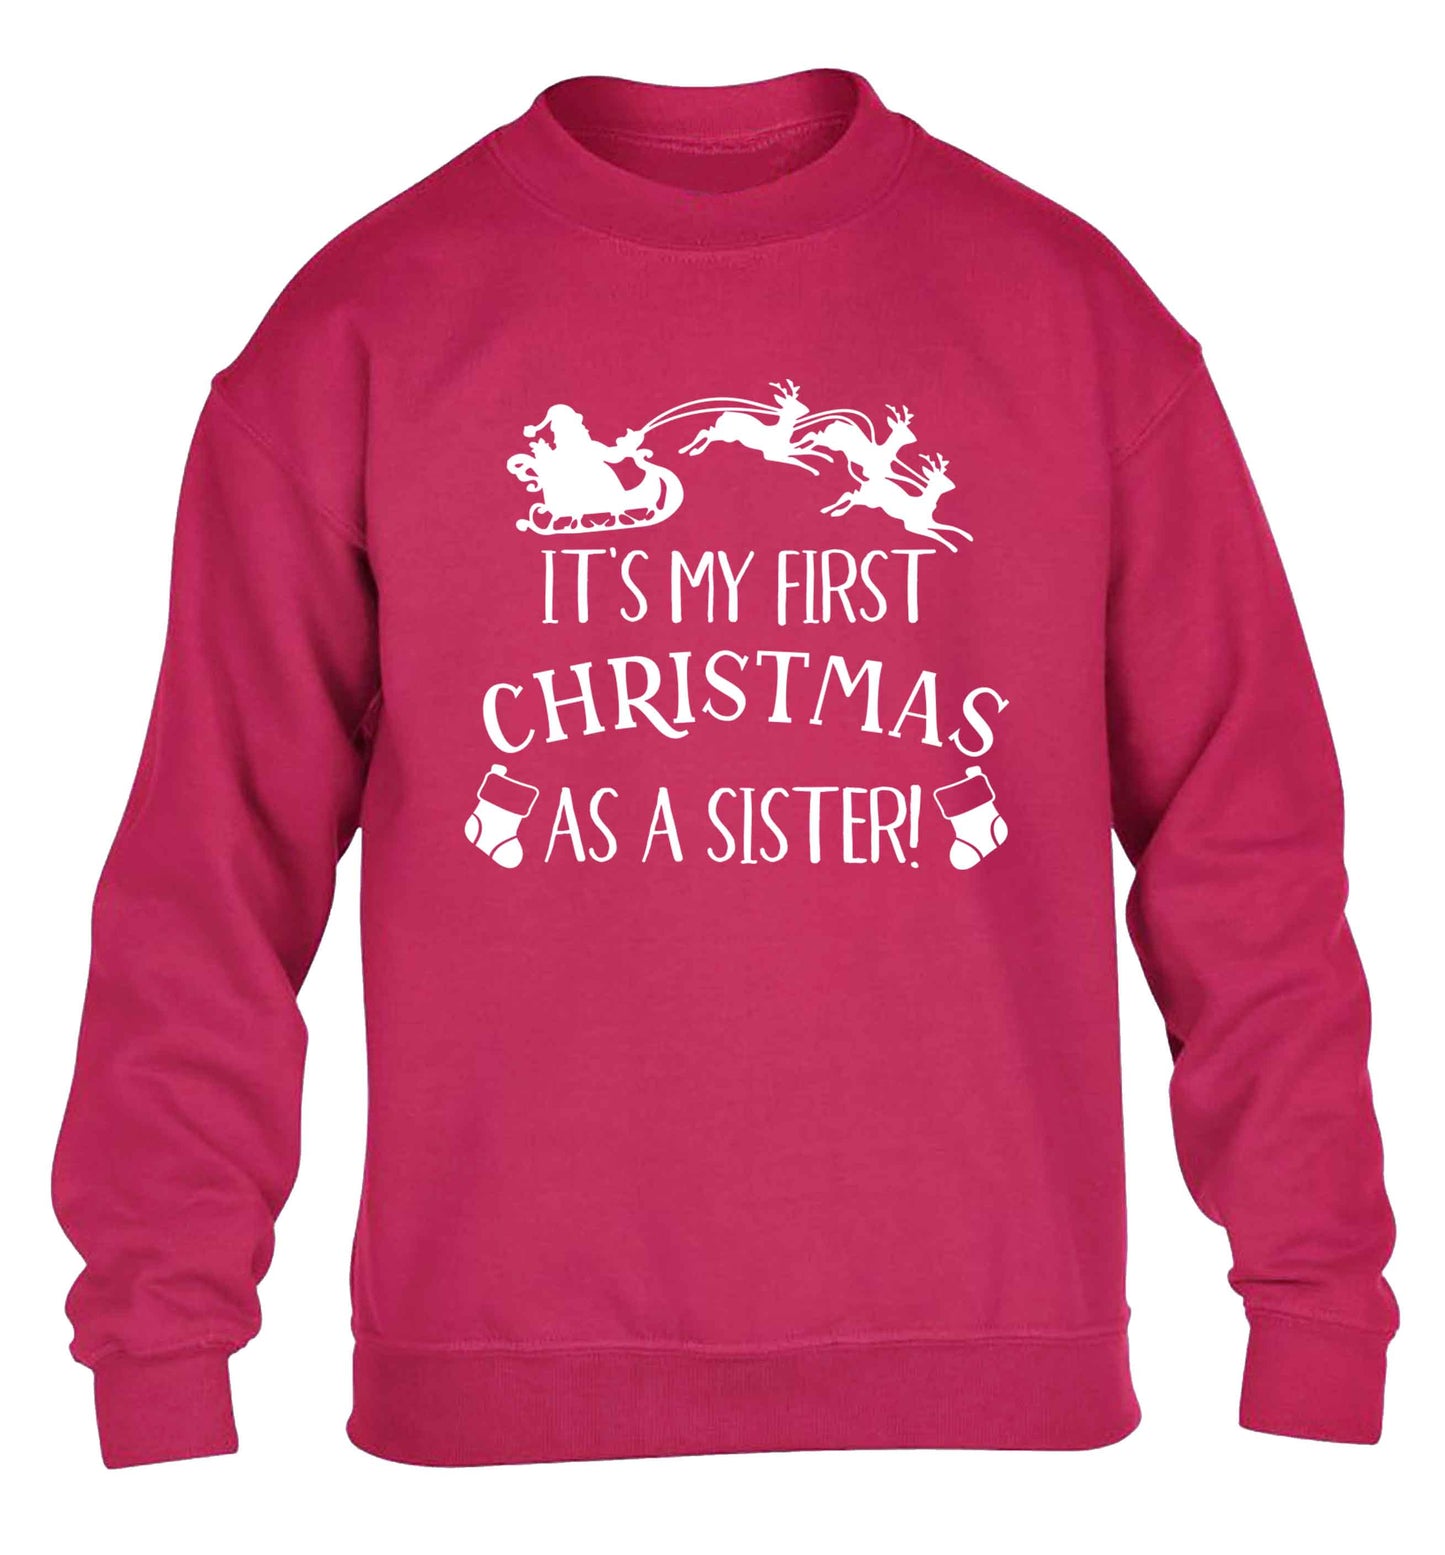 It's my first Christmas as a sister! children's pink sweater 12-13 Years